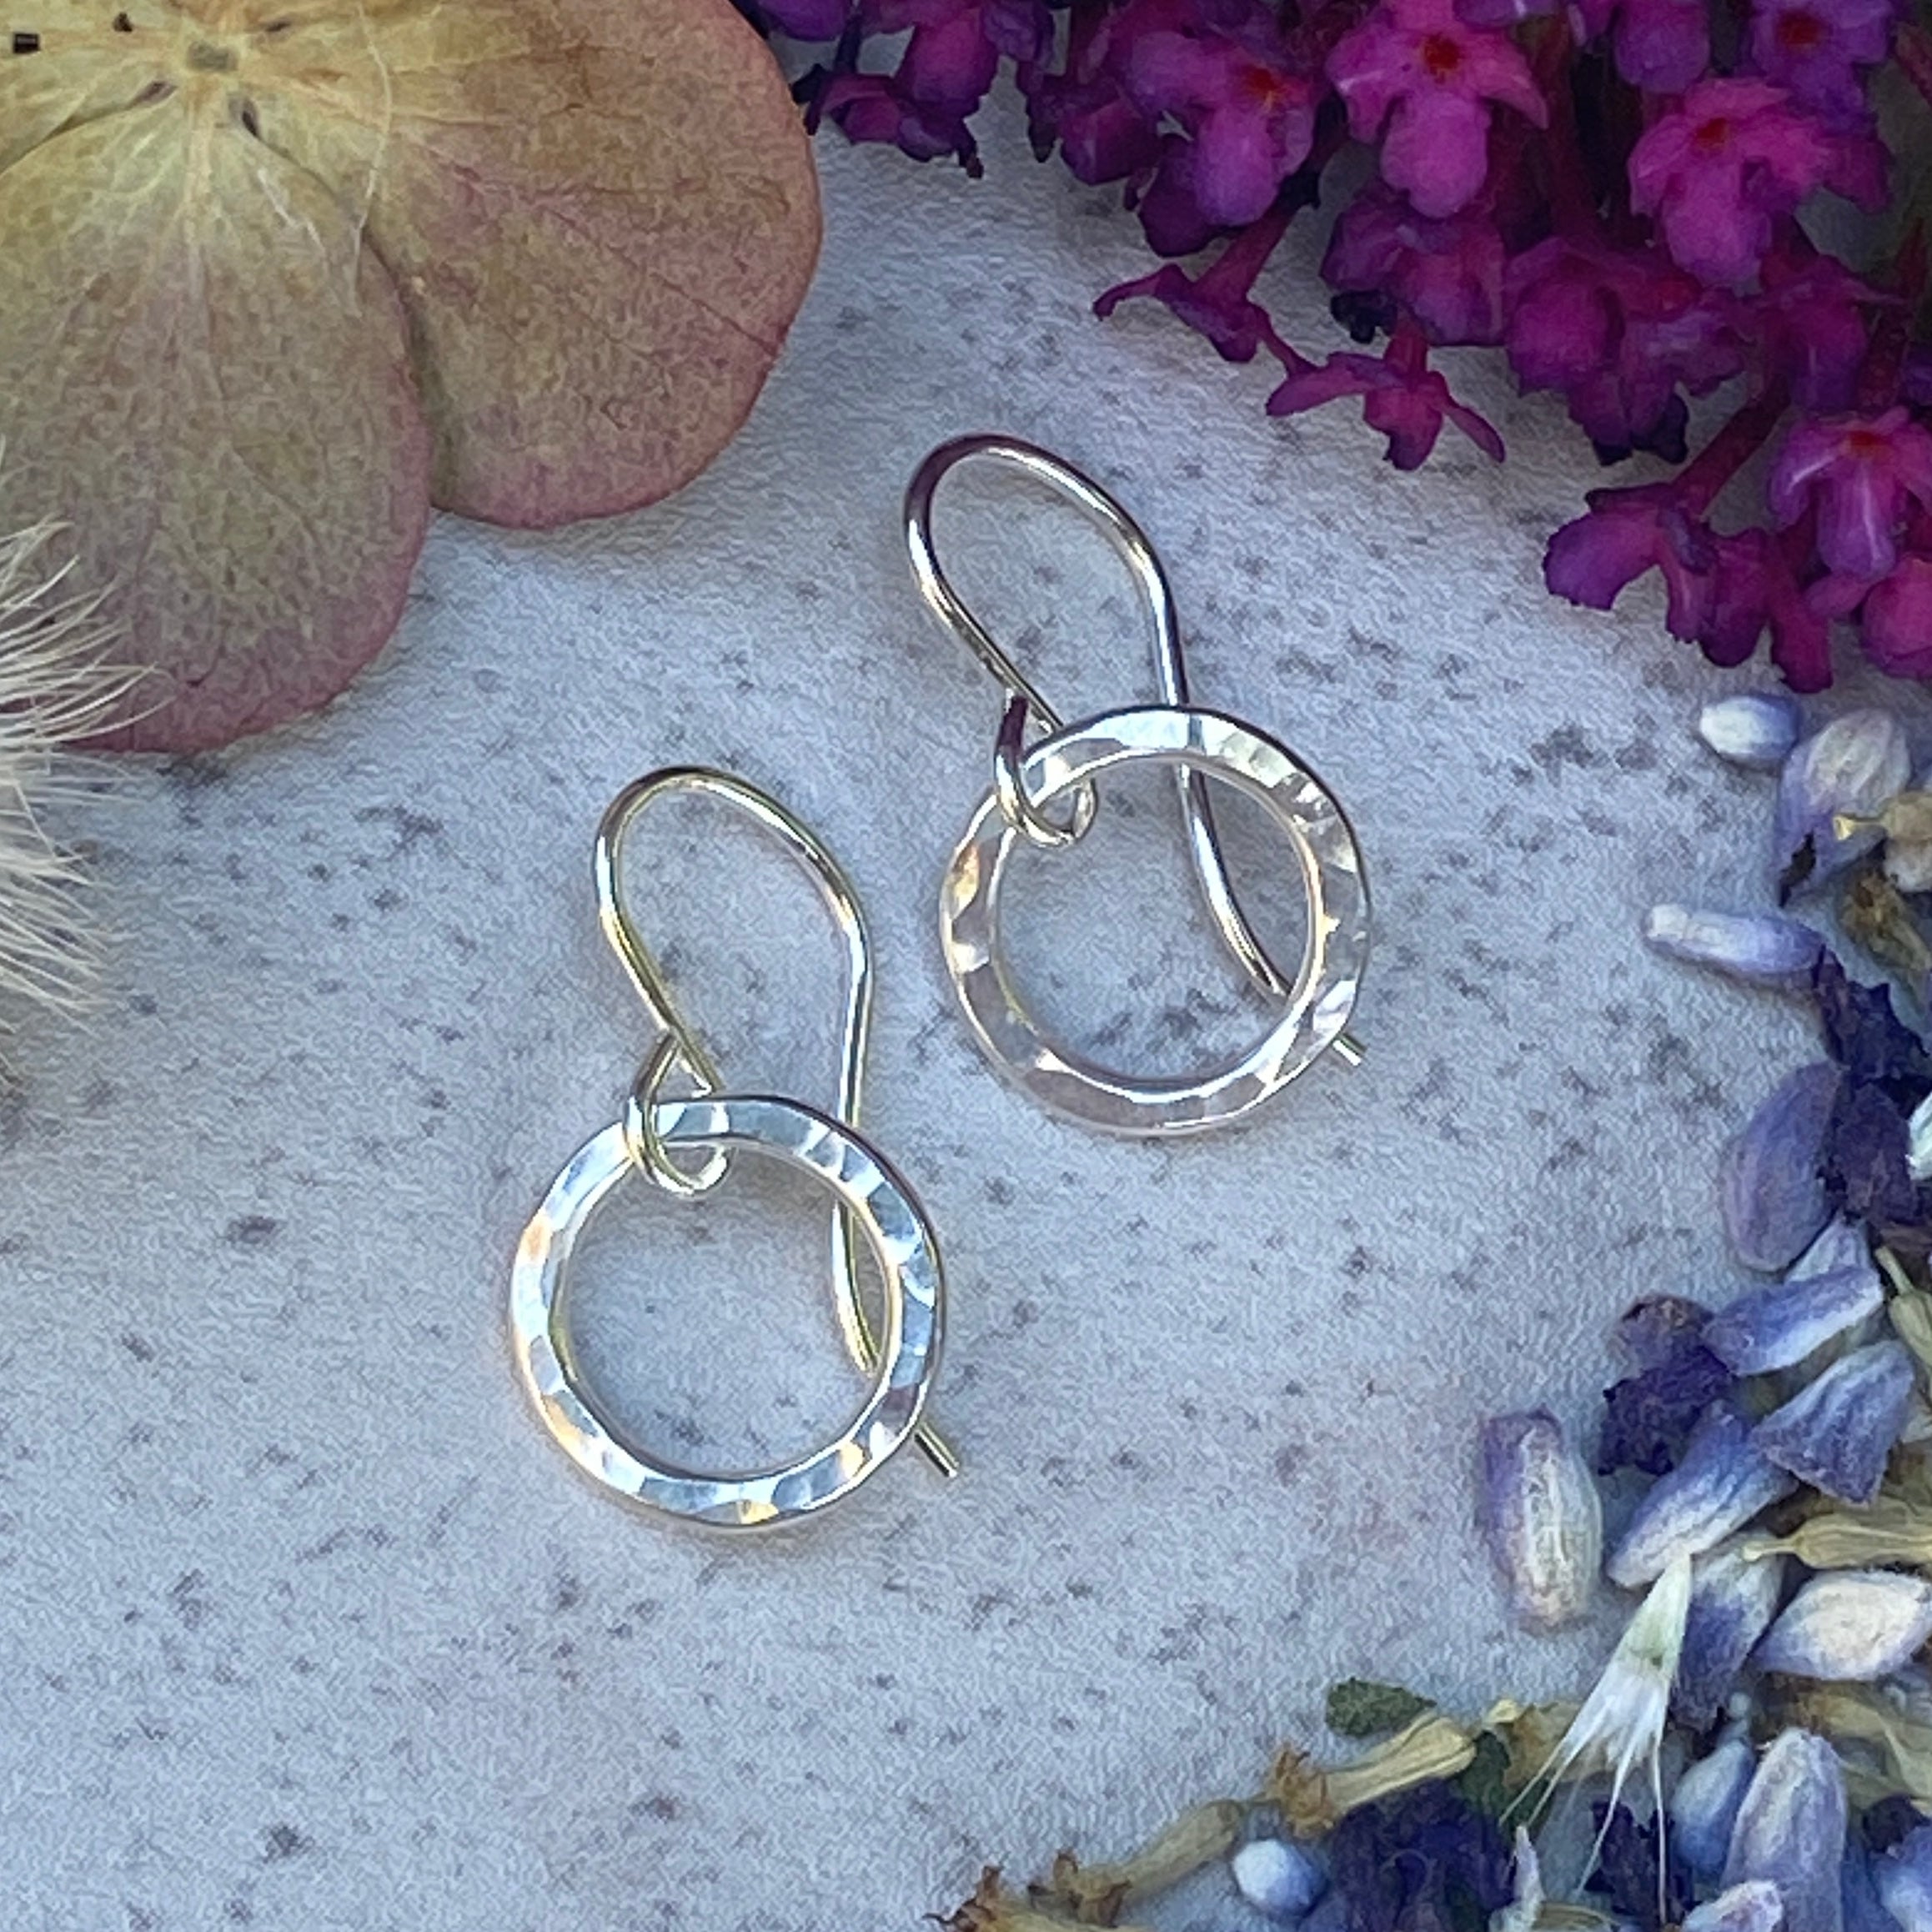 Pounded Circle Earrings in Four Sizes